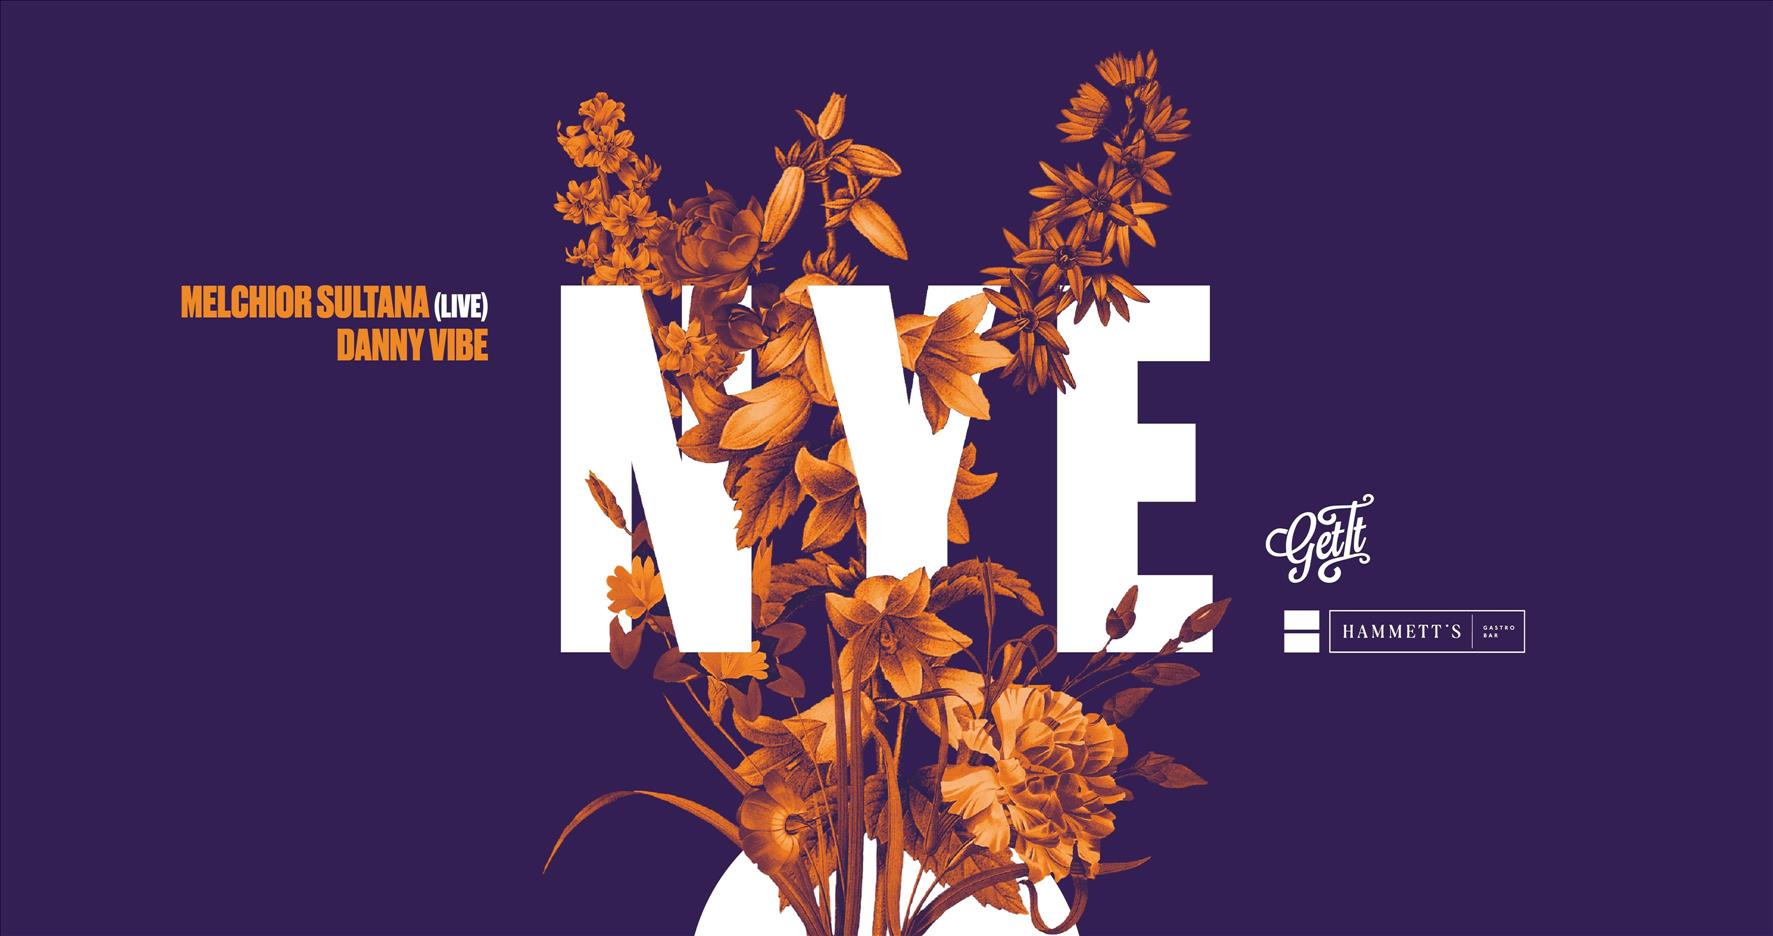 New Year's Eve at Hammett's Hosted By Get It poster